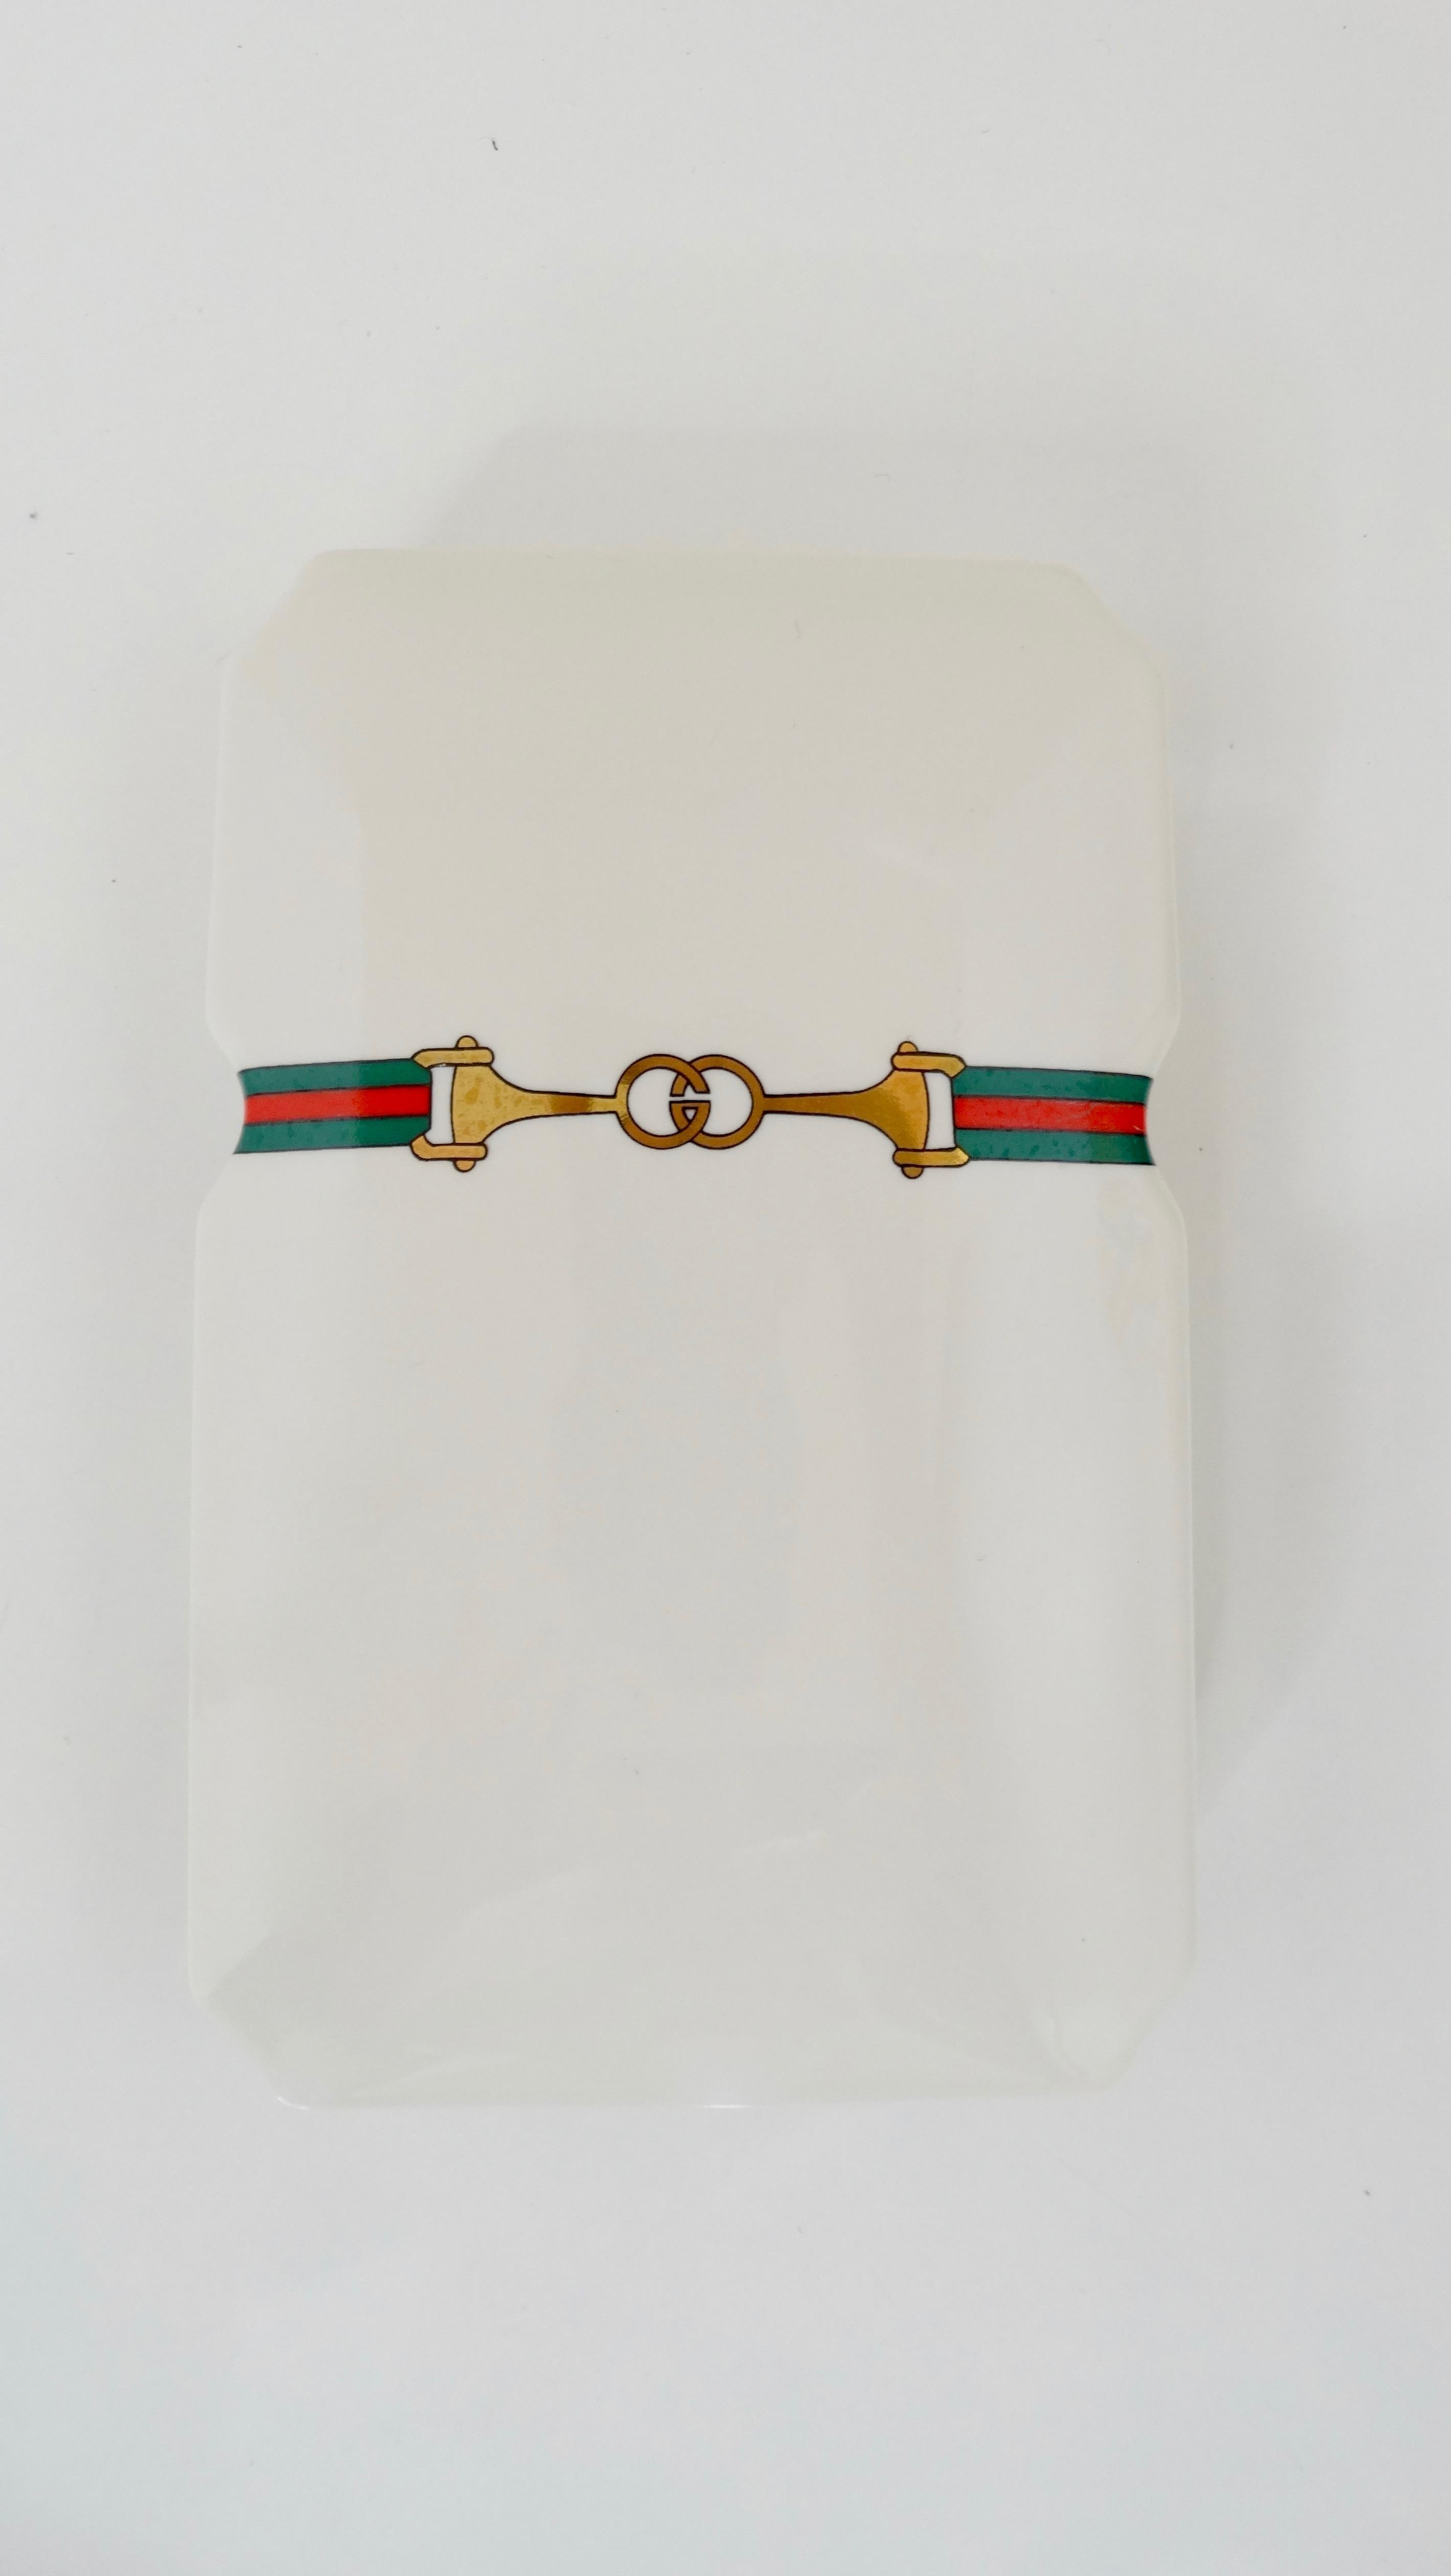 Spice up your space with this Gucci incense set! Circa 1980s, this two piece porcelain incense box features the iconic green and red Gucci horse bit logo on the front. Stored inside are red and green perfumed incense and a burner stand. The perfect